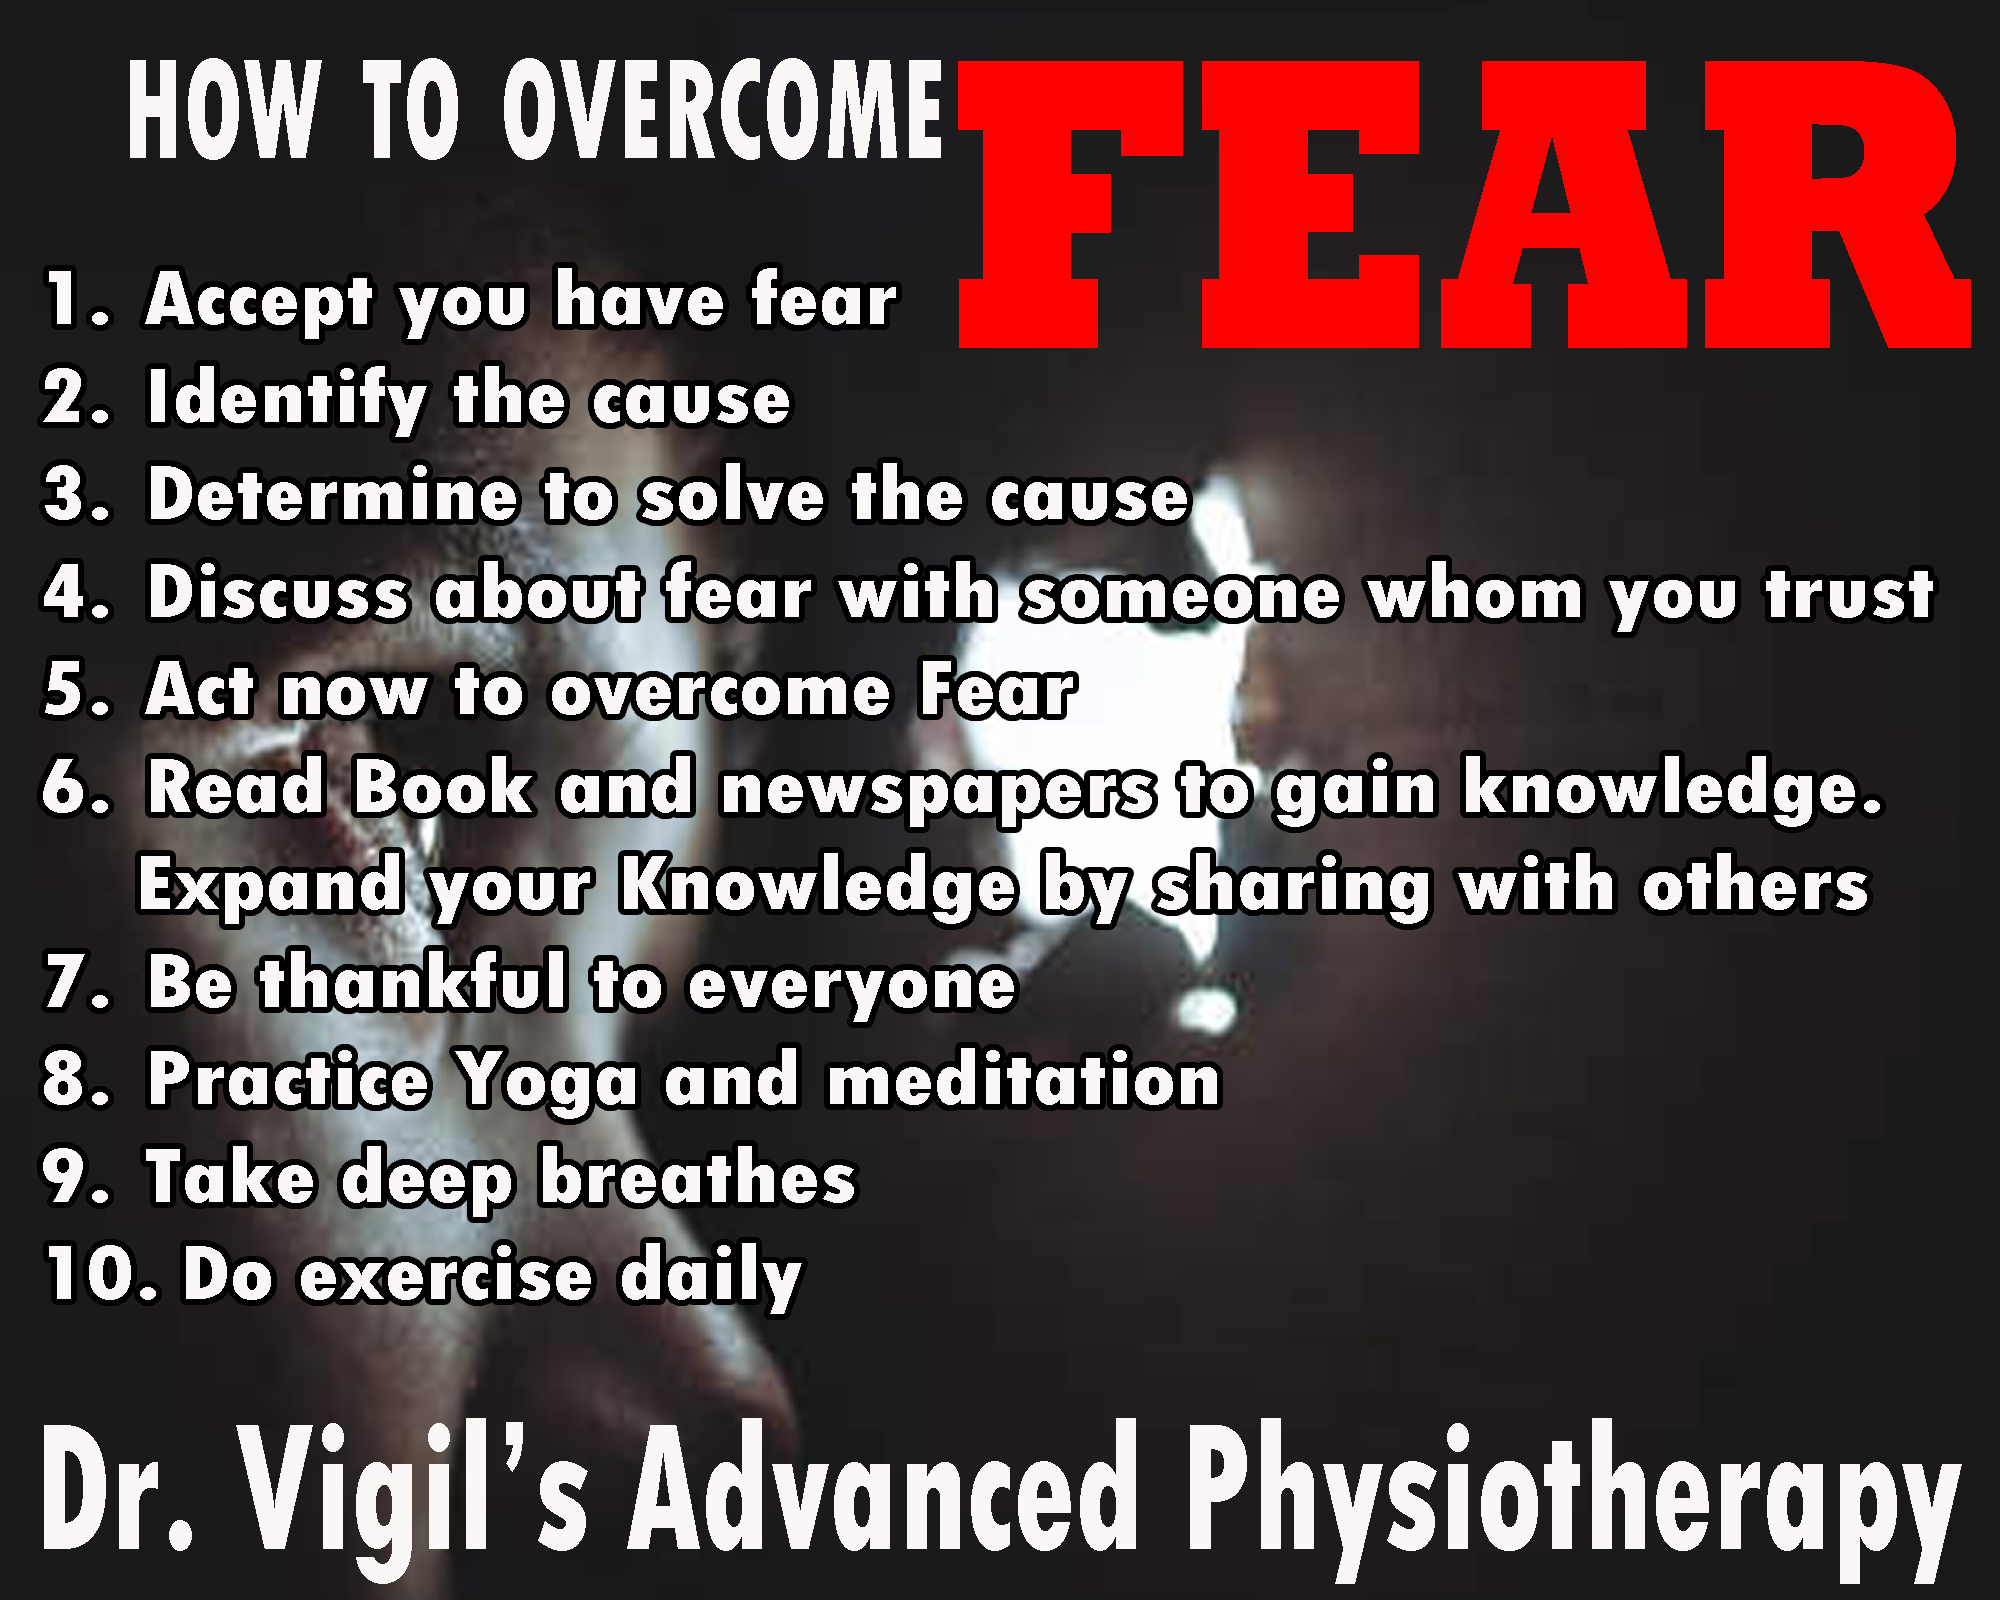 10 ways to How to Overcome Fears